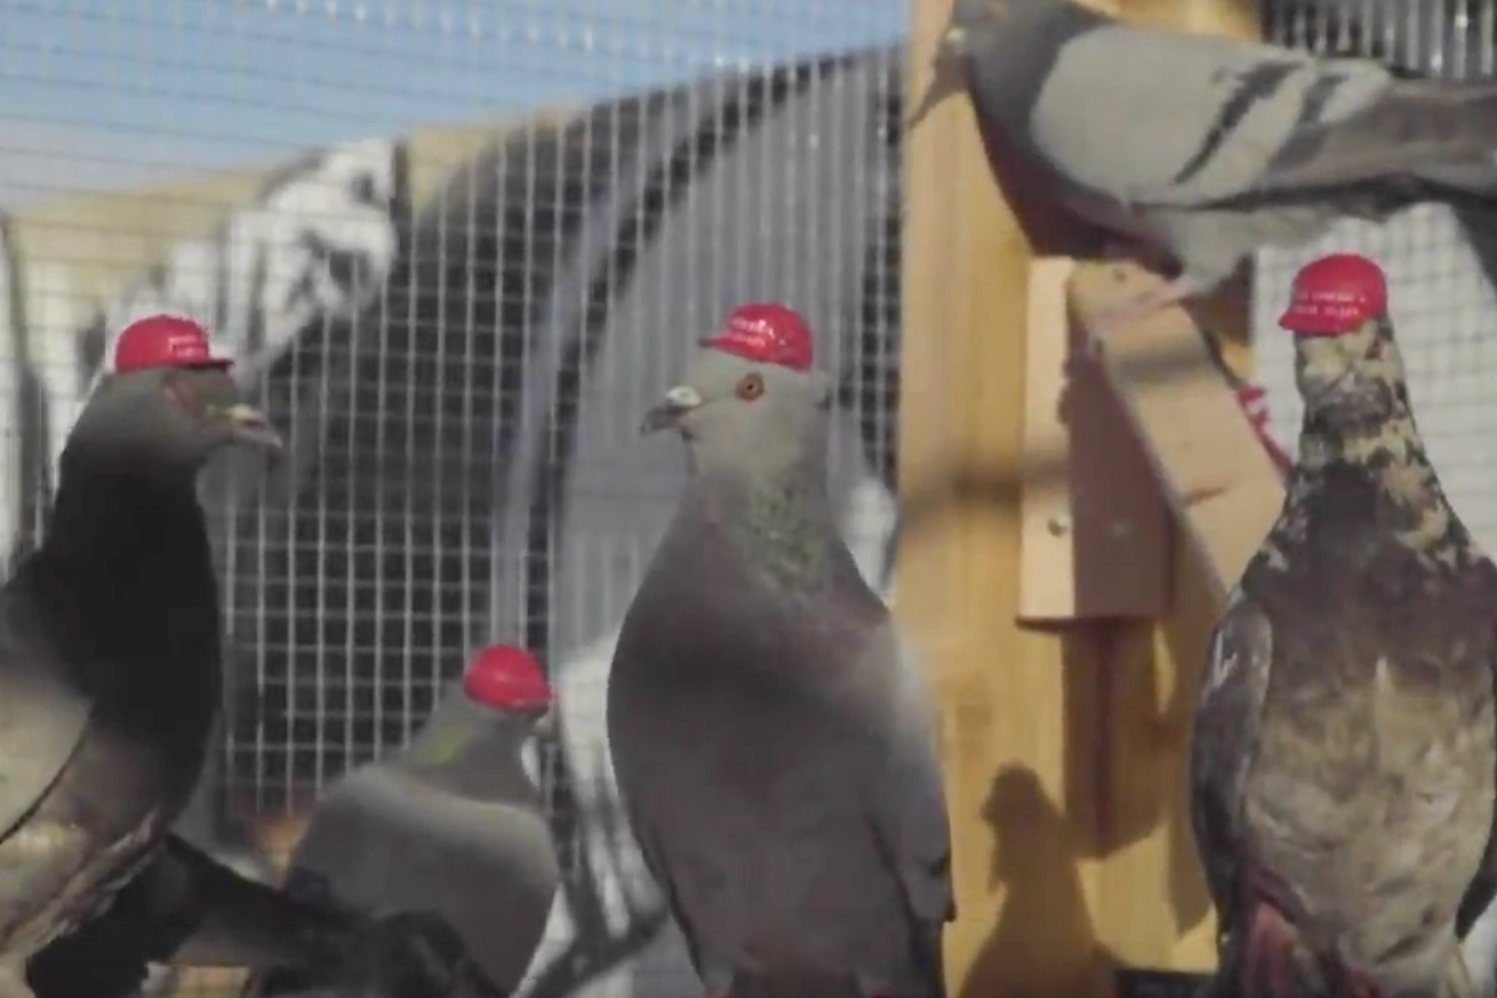 A protest group glued tiny Make America Great Again hats to pigeons in Las Vegas.